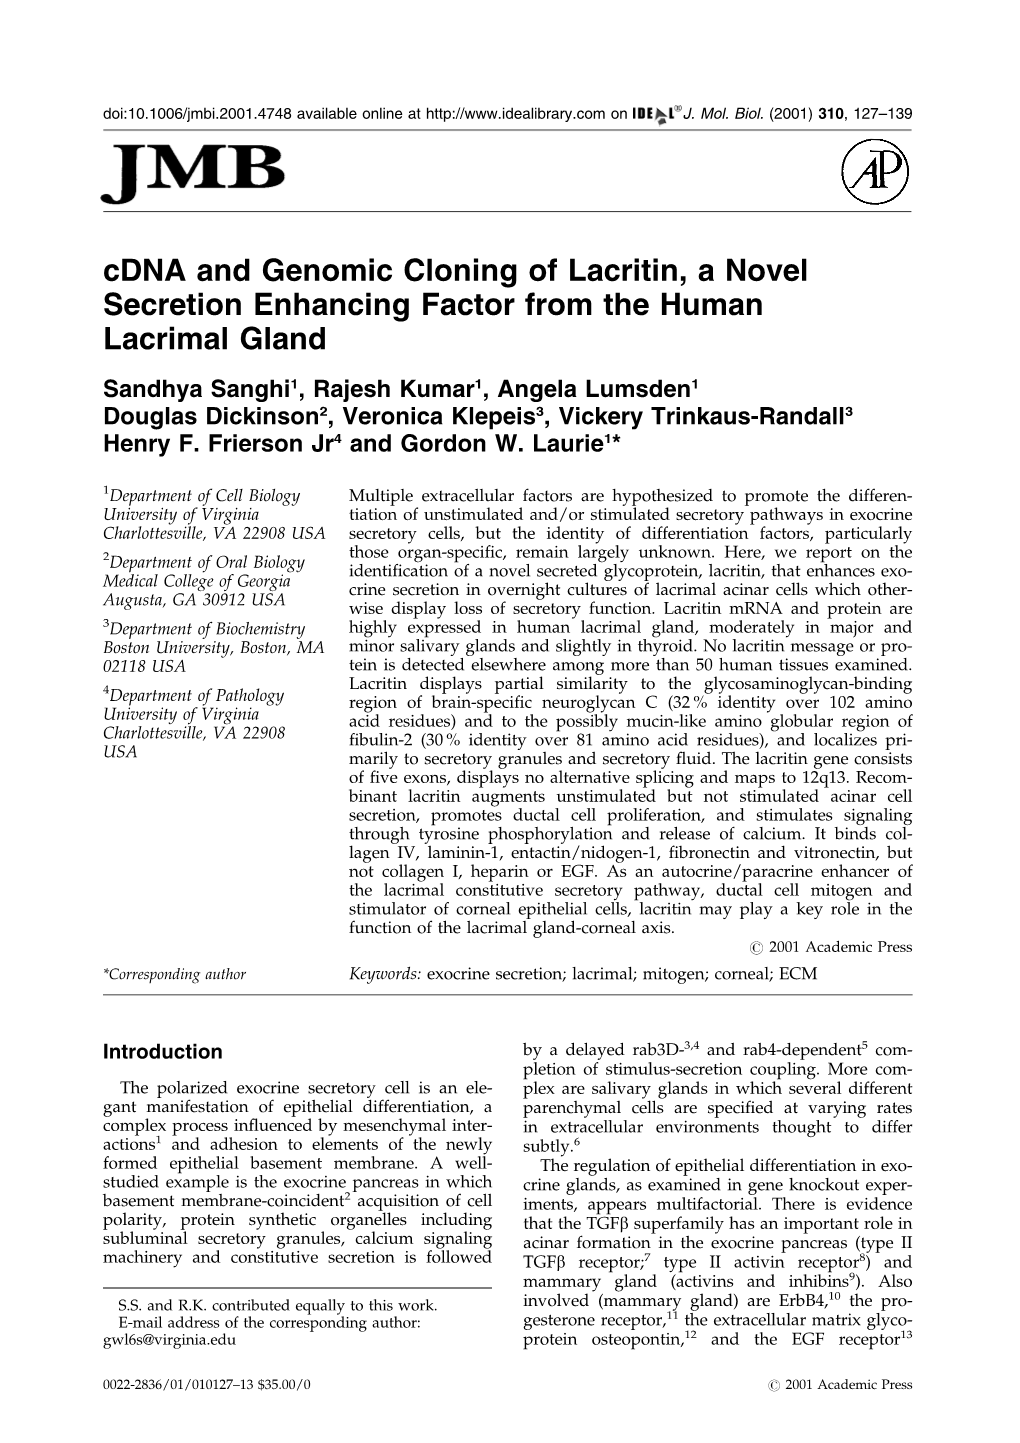 Cdna and Genomic Cloning of Lacritin, a Novel Secretion Enhancing Factor from the Human Lacrimal Gland